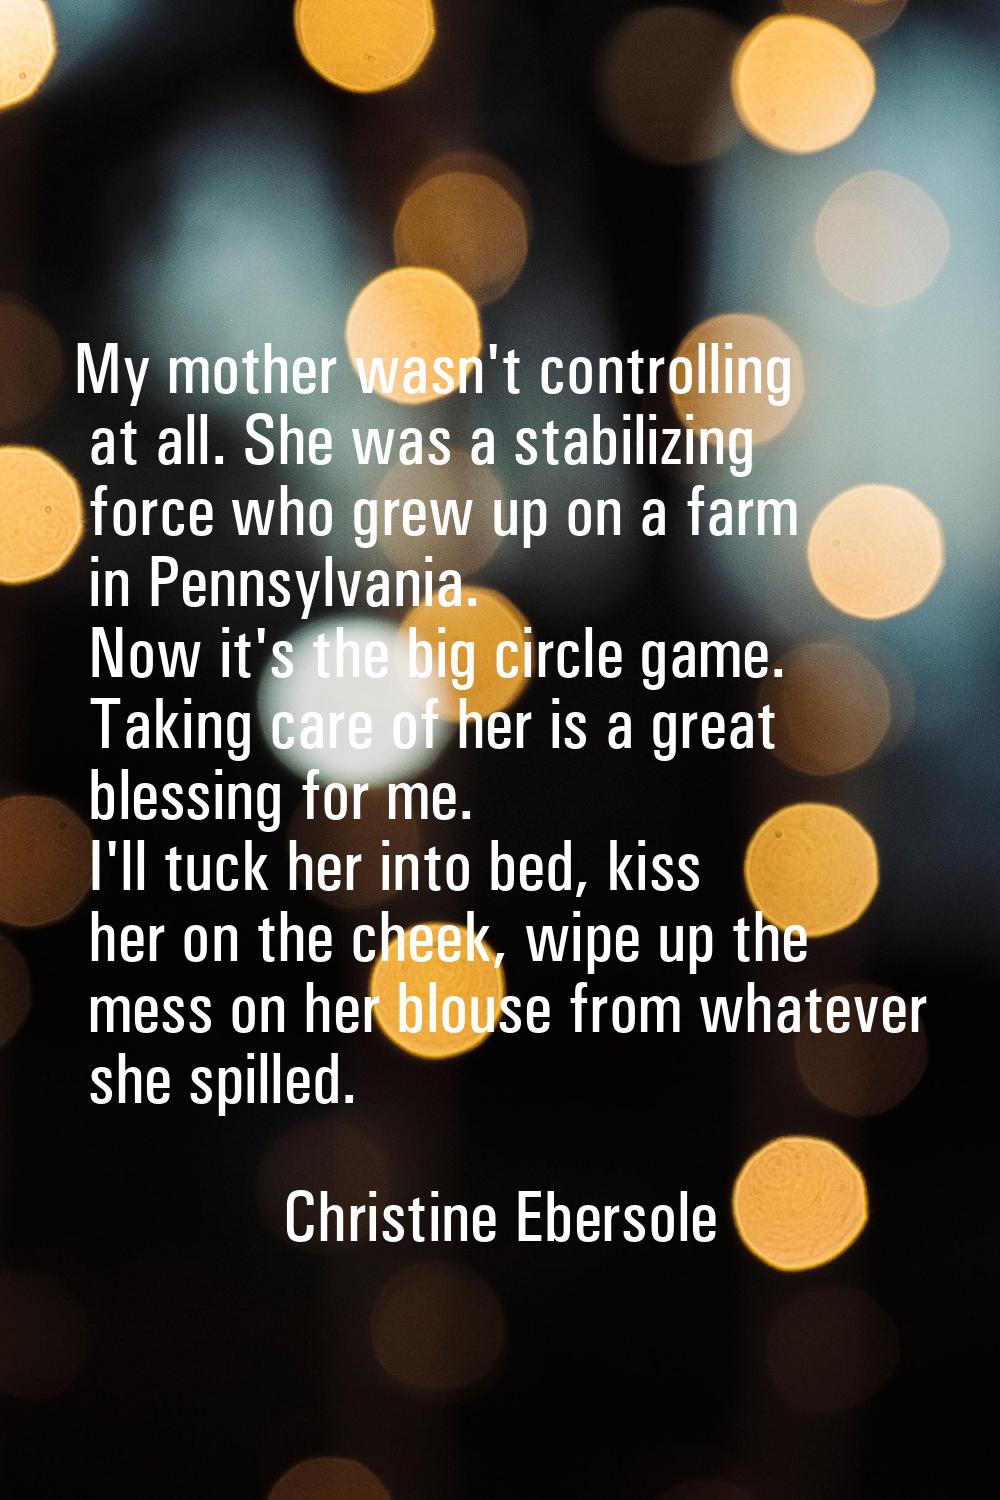 My mother wasn't controlling at all. She was a stabilizing force who grew up on a farm in Pennsylva